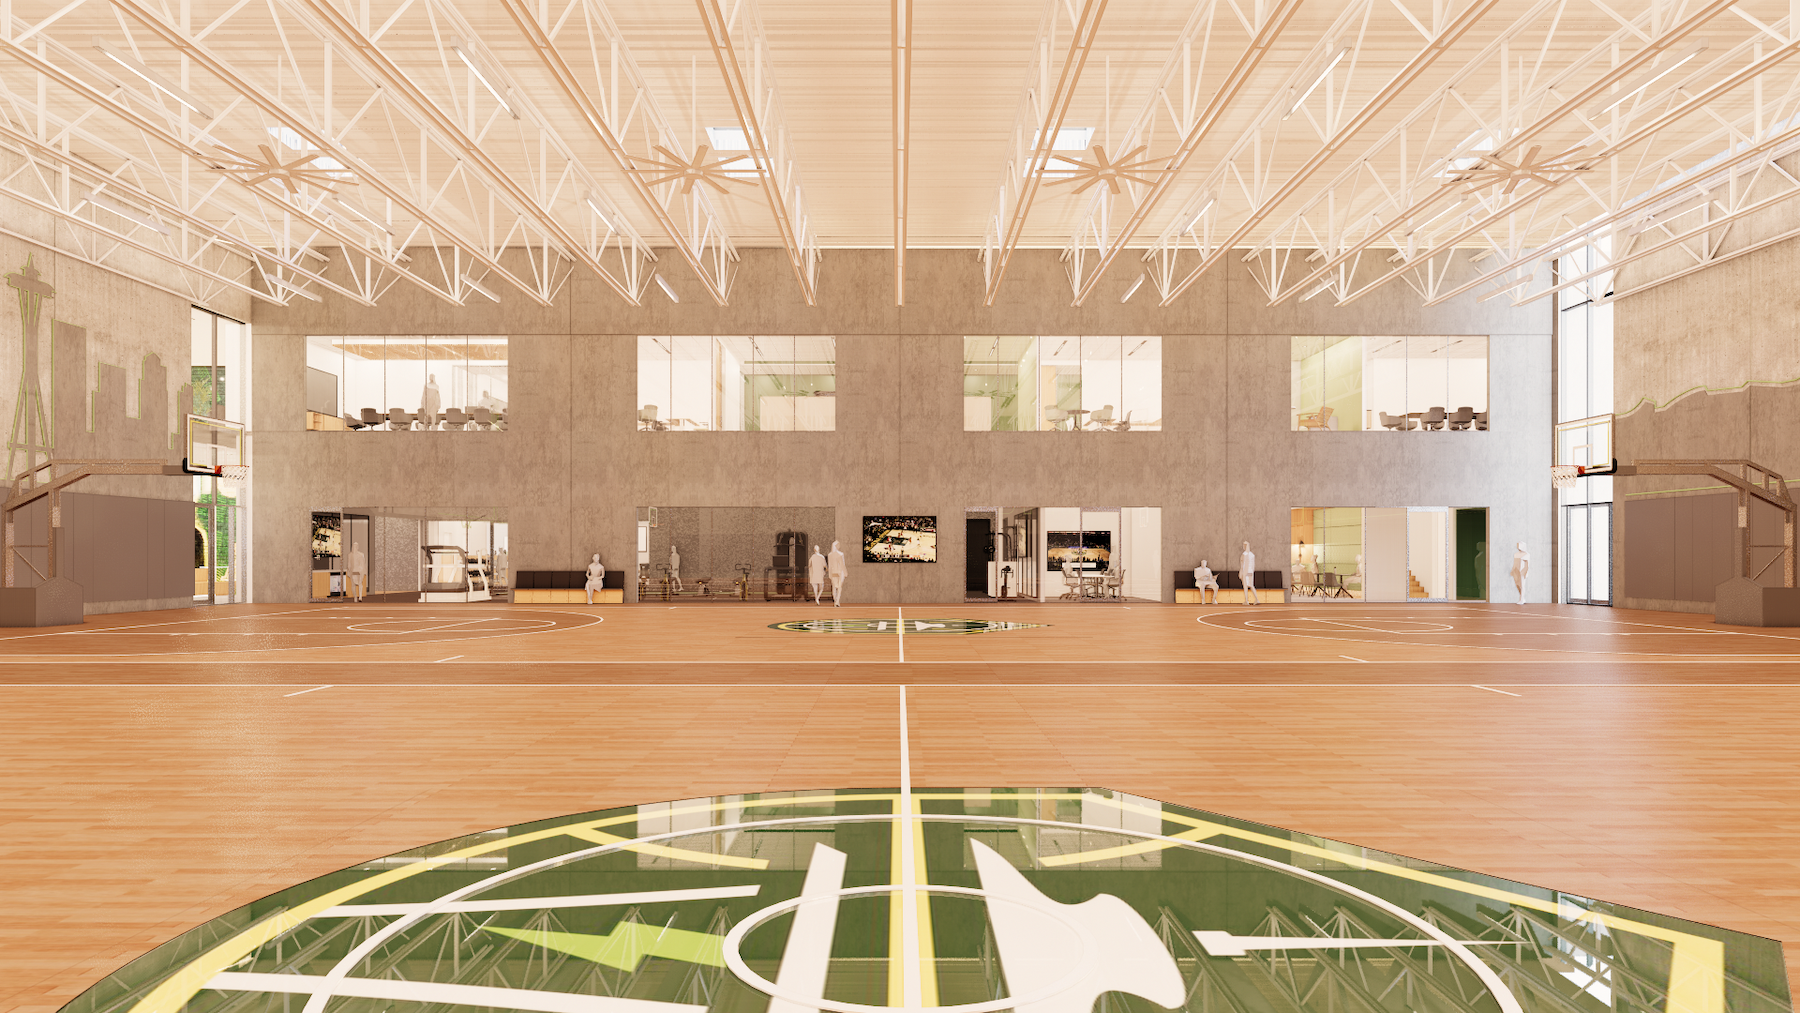 WNBA practice facility will offer training opportunities for female athletes and youth